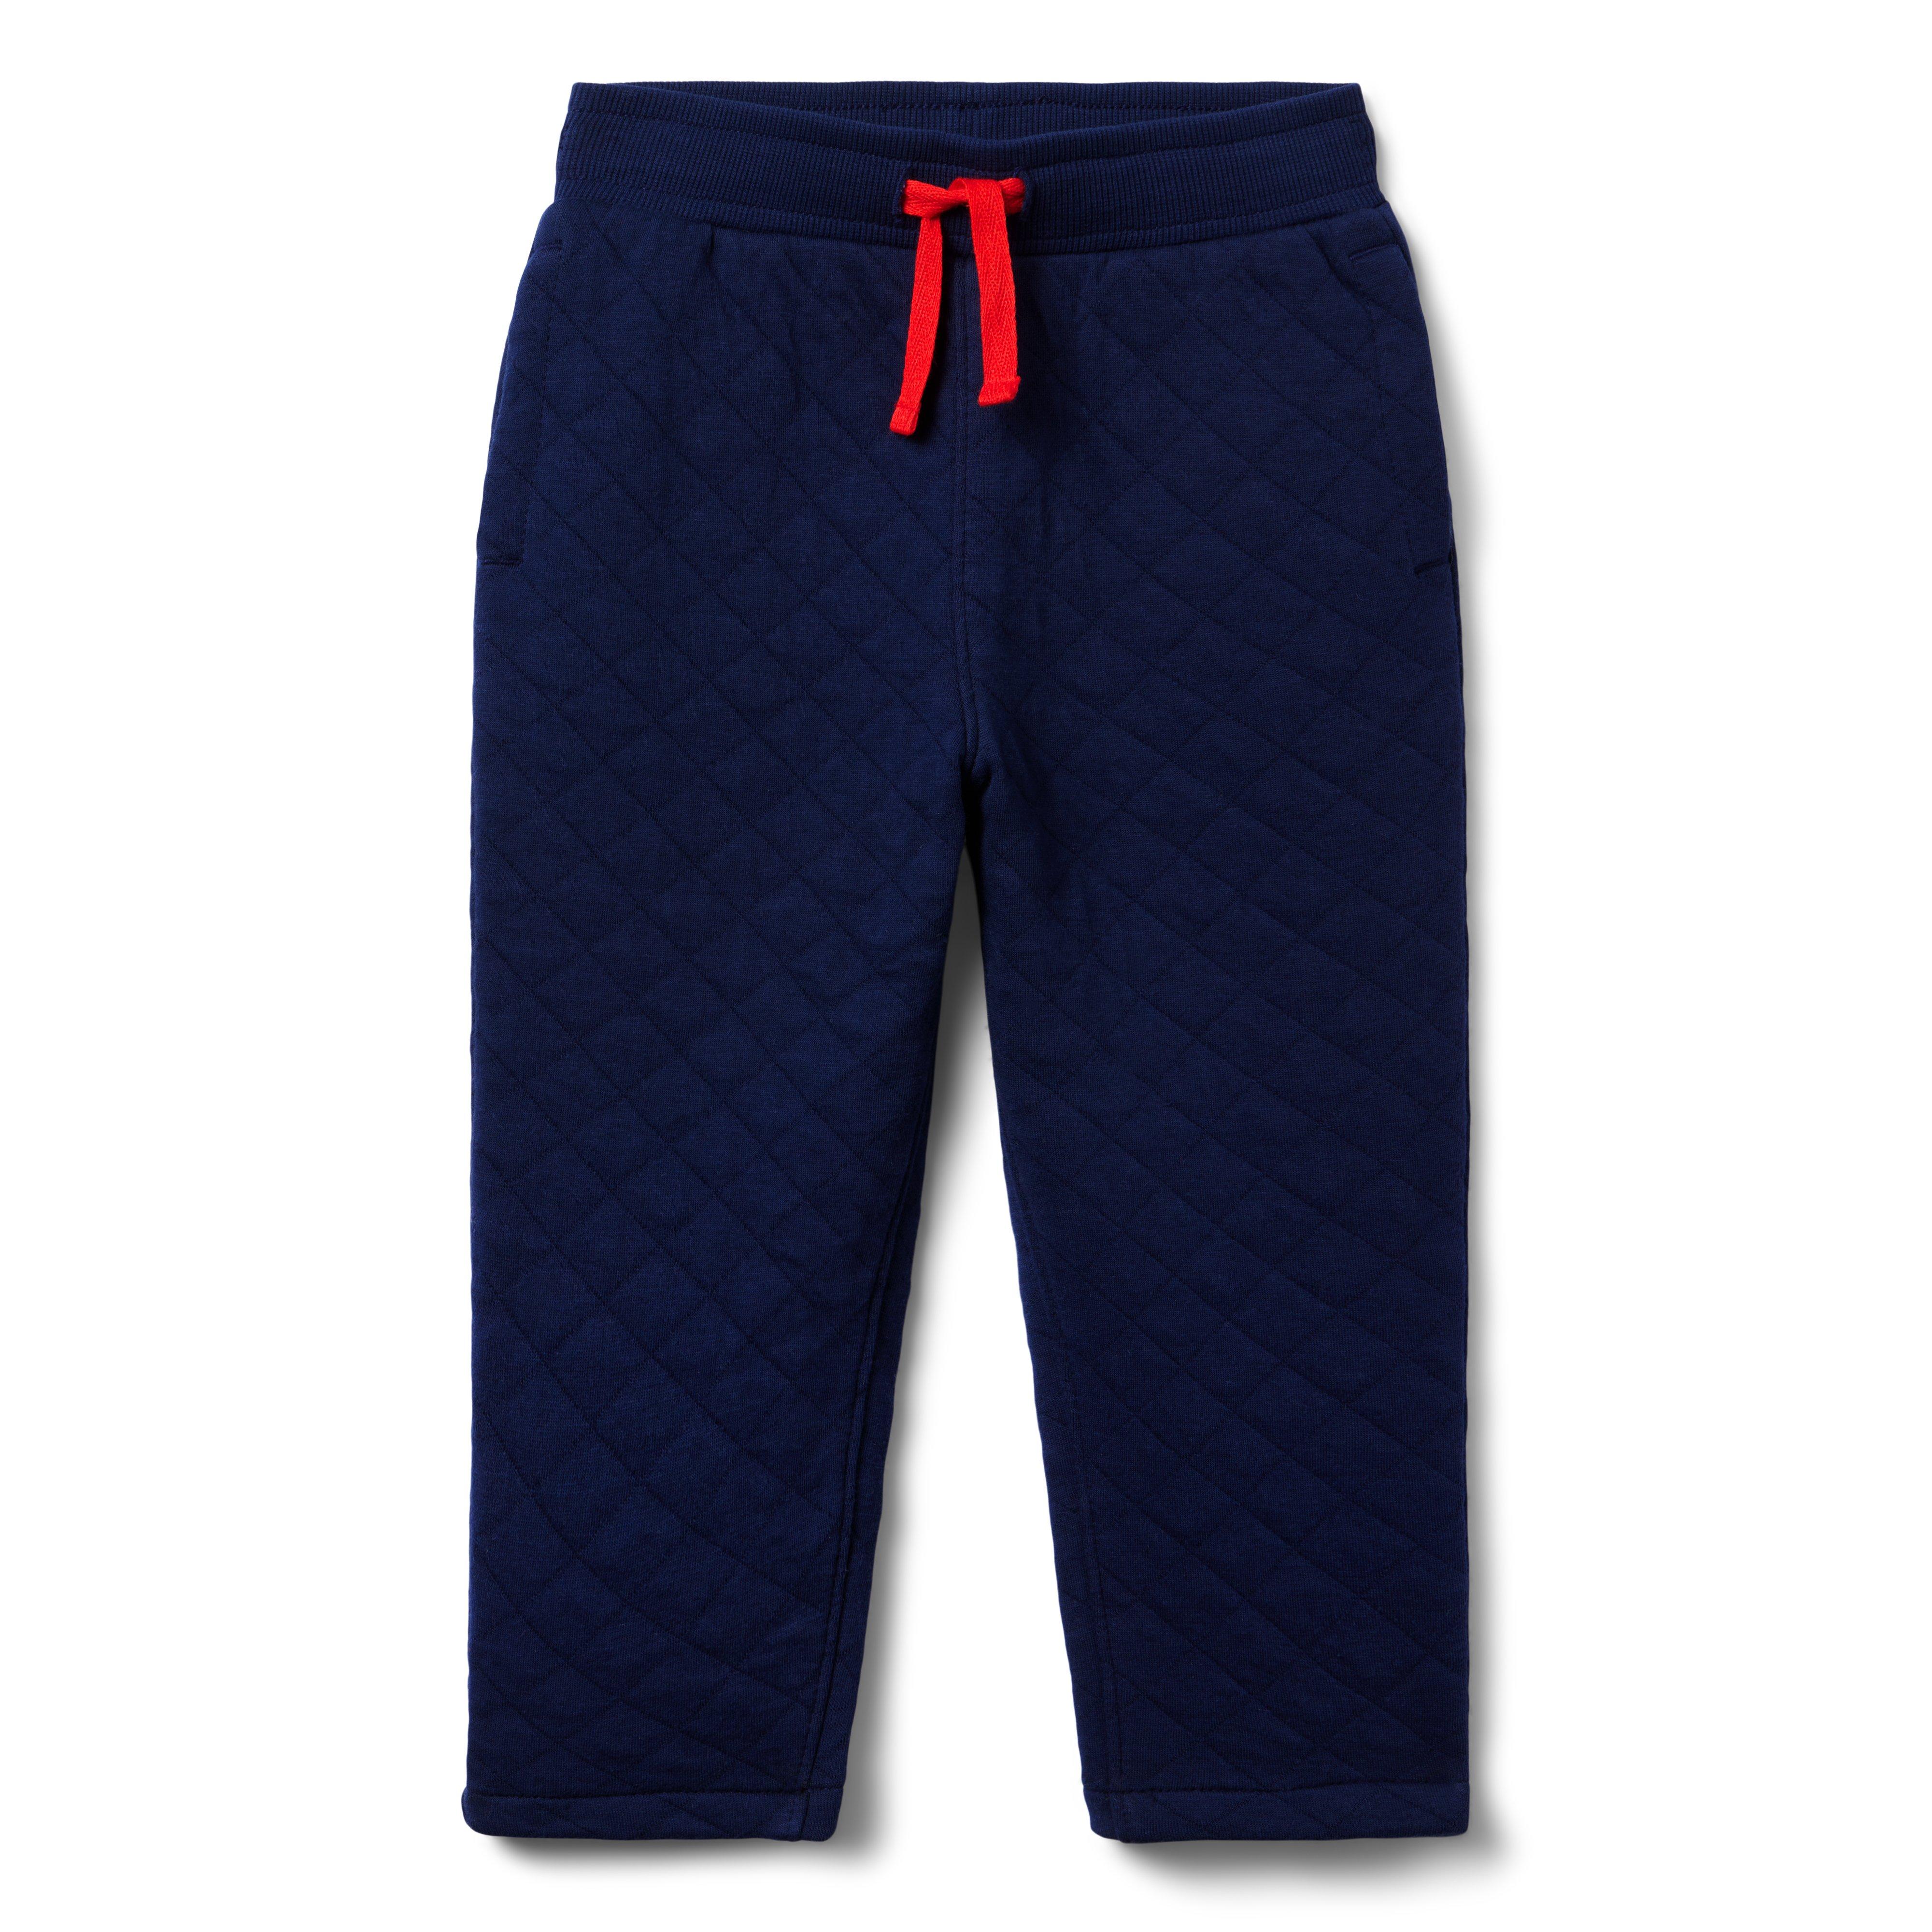 The Quilted Jogger